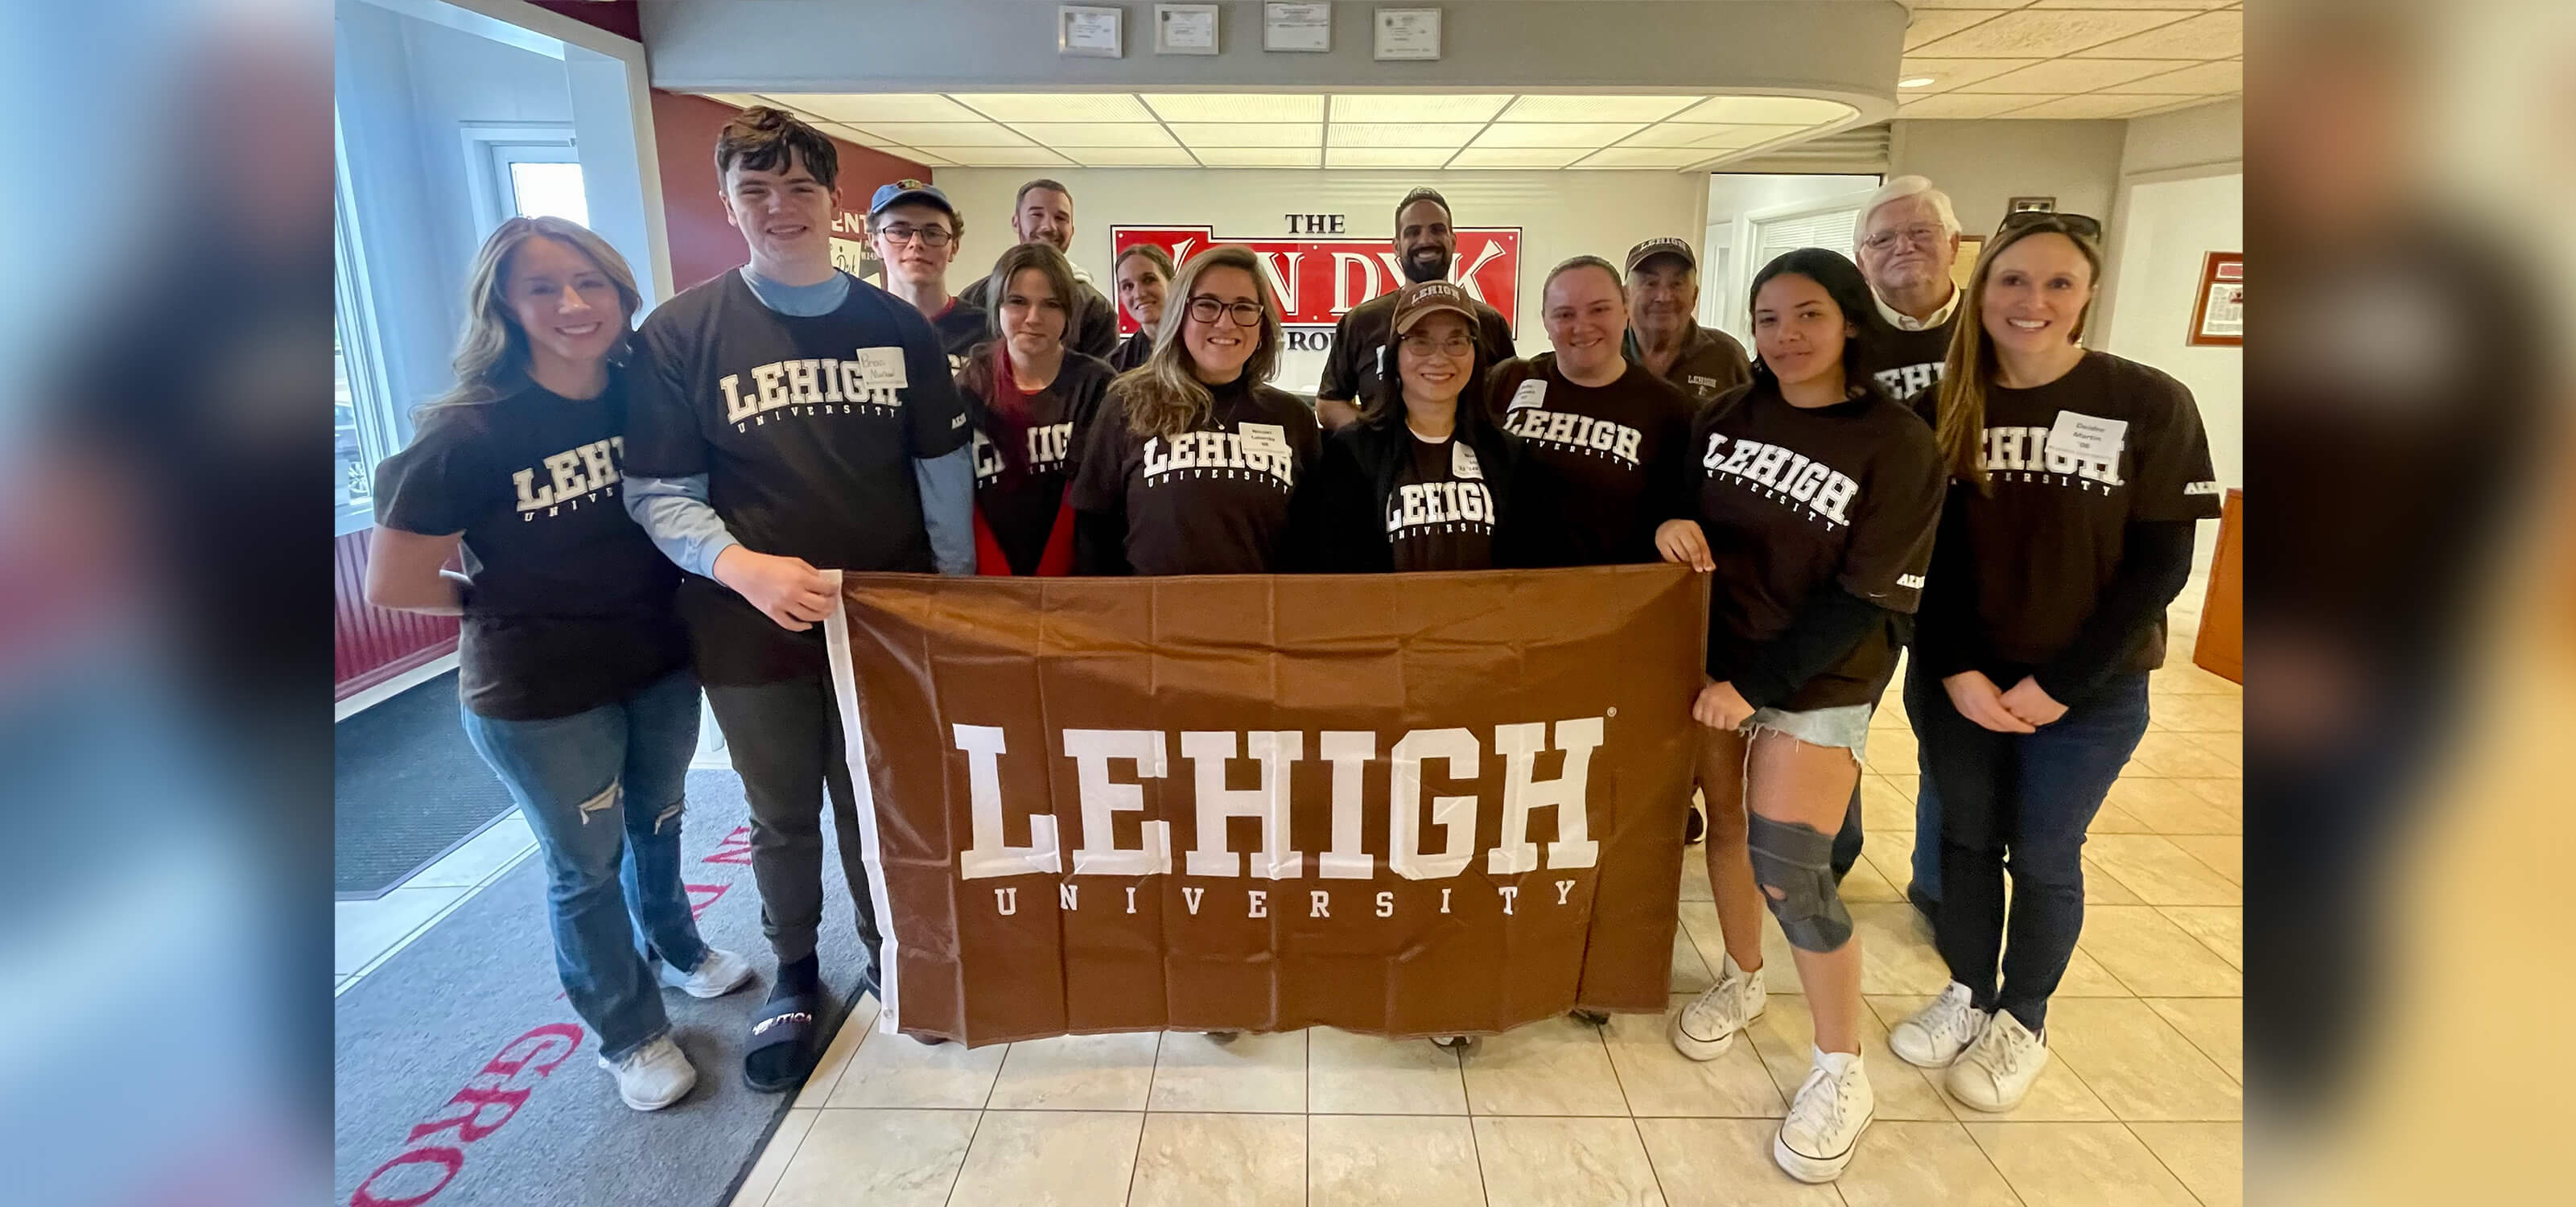 Deidre Martin and her group of alumni volunteers pose wearing brown Lehigh tshirts and holding up a Lehigh flag at the Van Dyk Group headquarters.